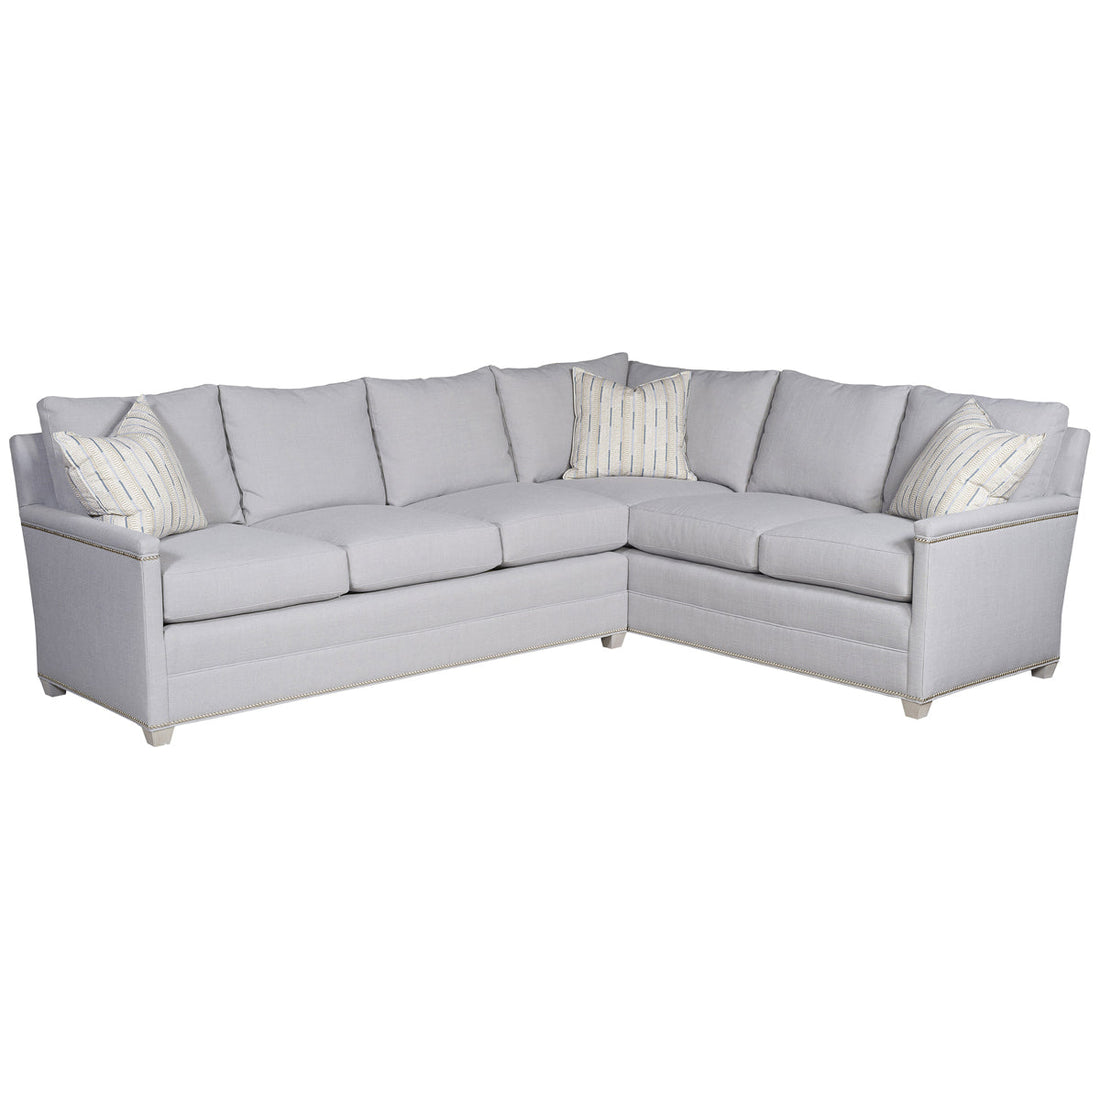 Vanguard Furniture Connelly Sectional